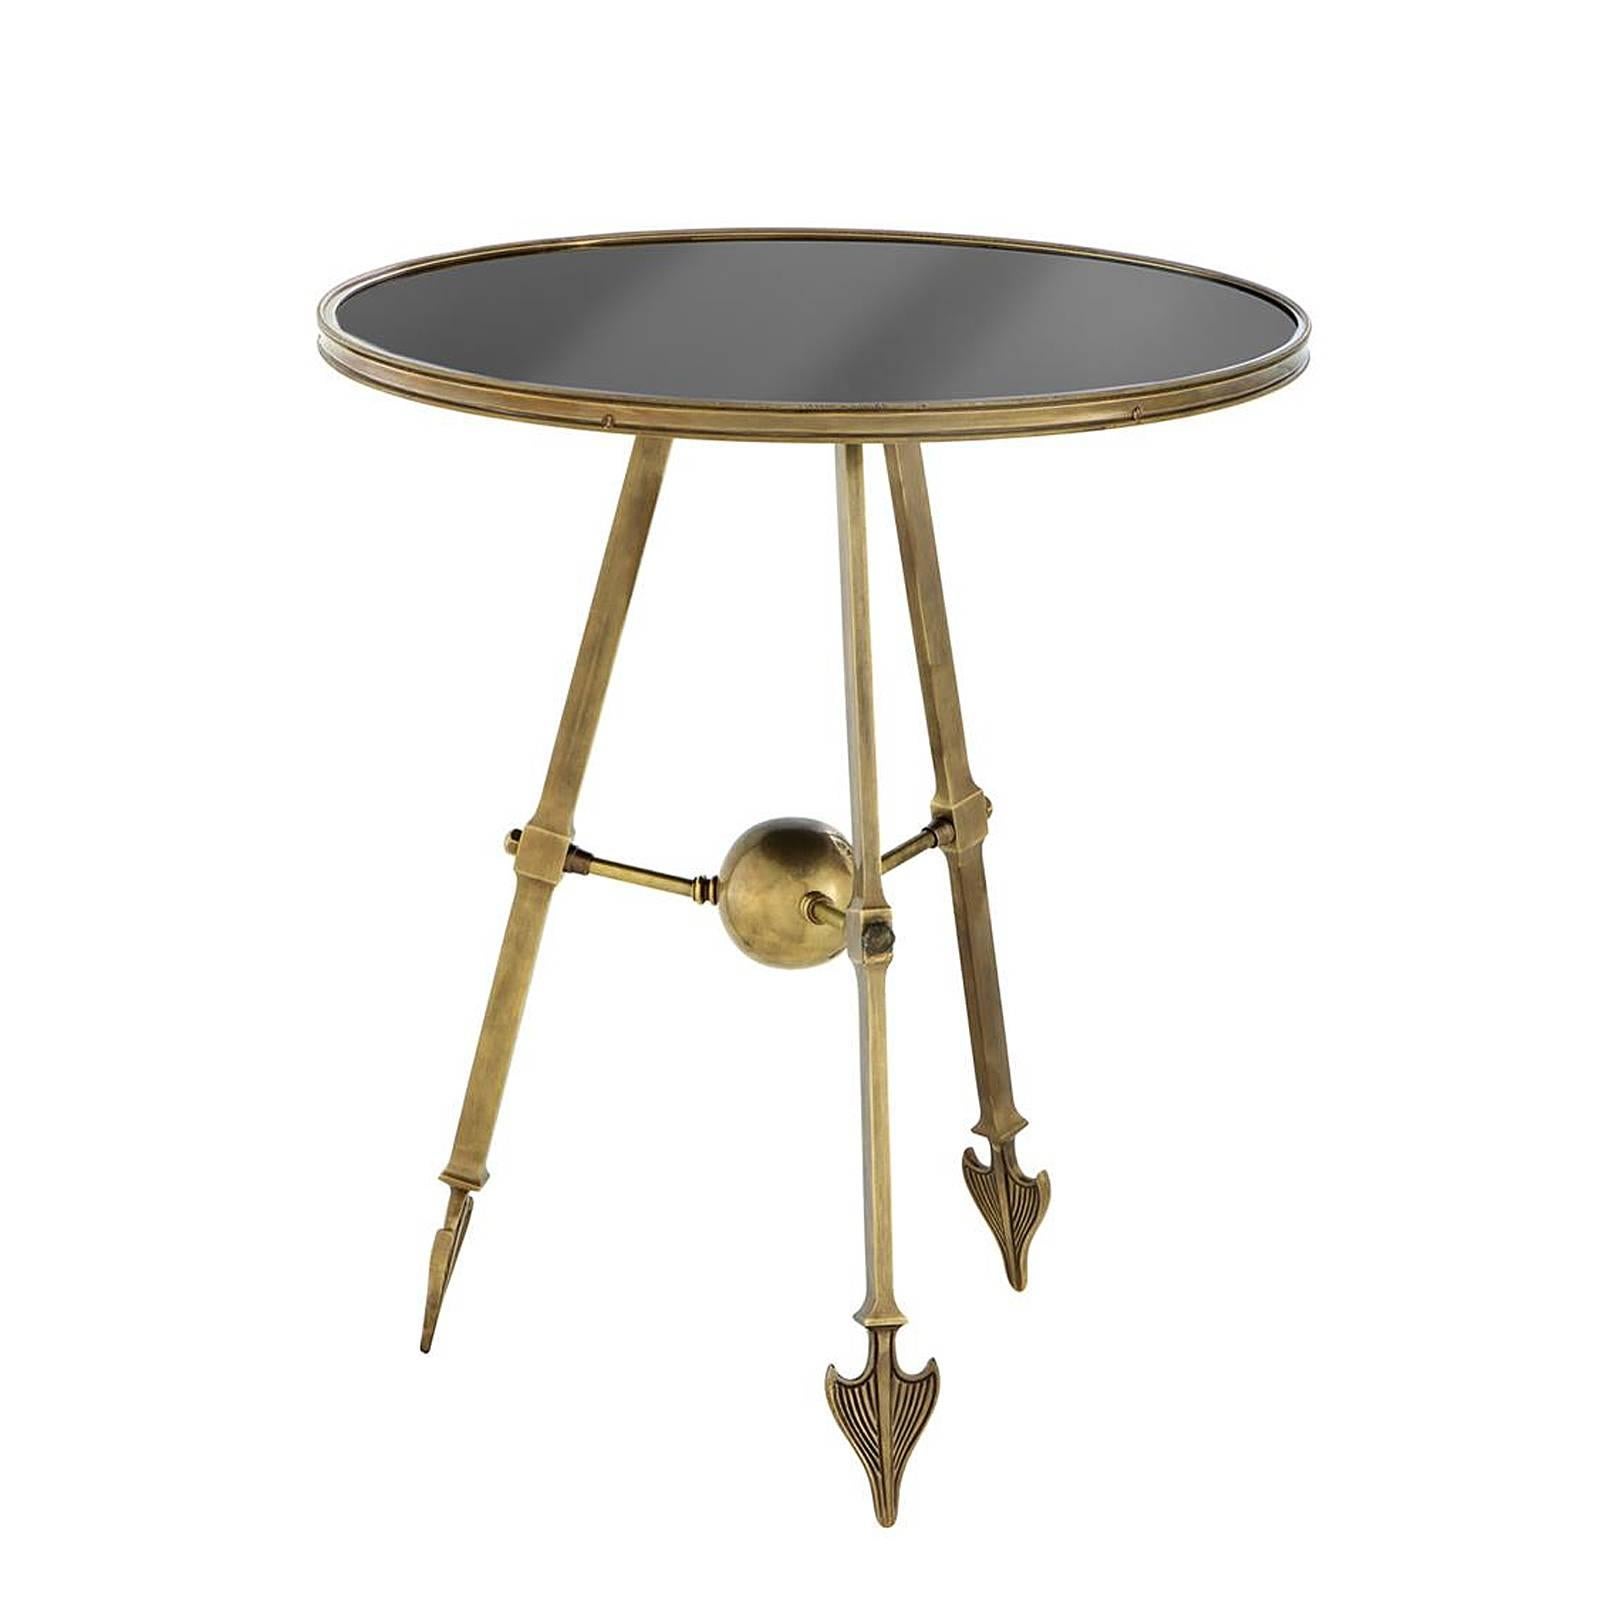 Cupidon Side Table in Antique Brass or Antique Silver Finish